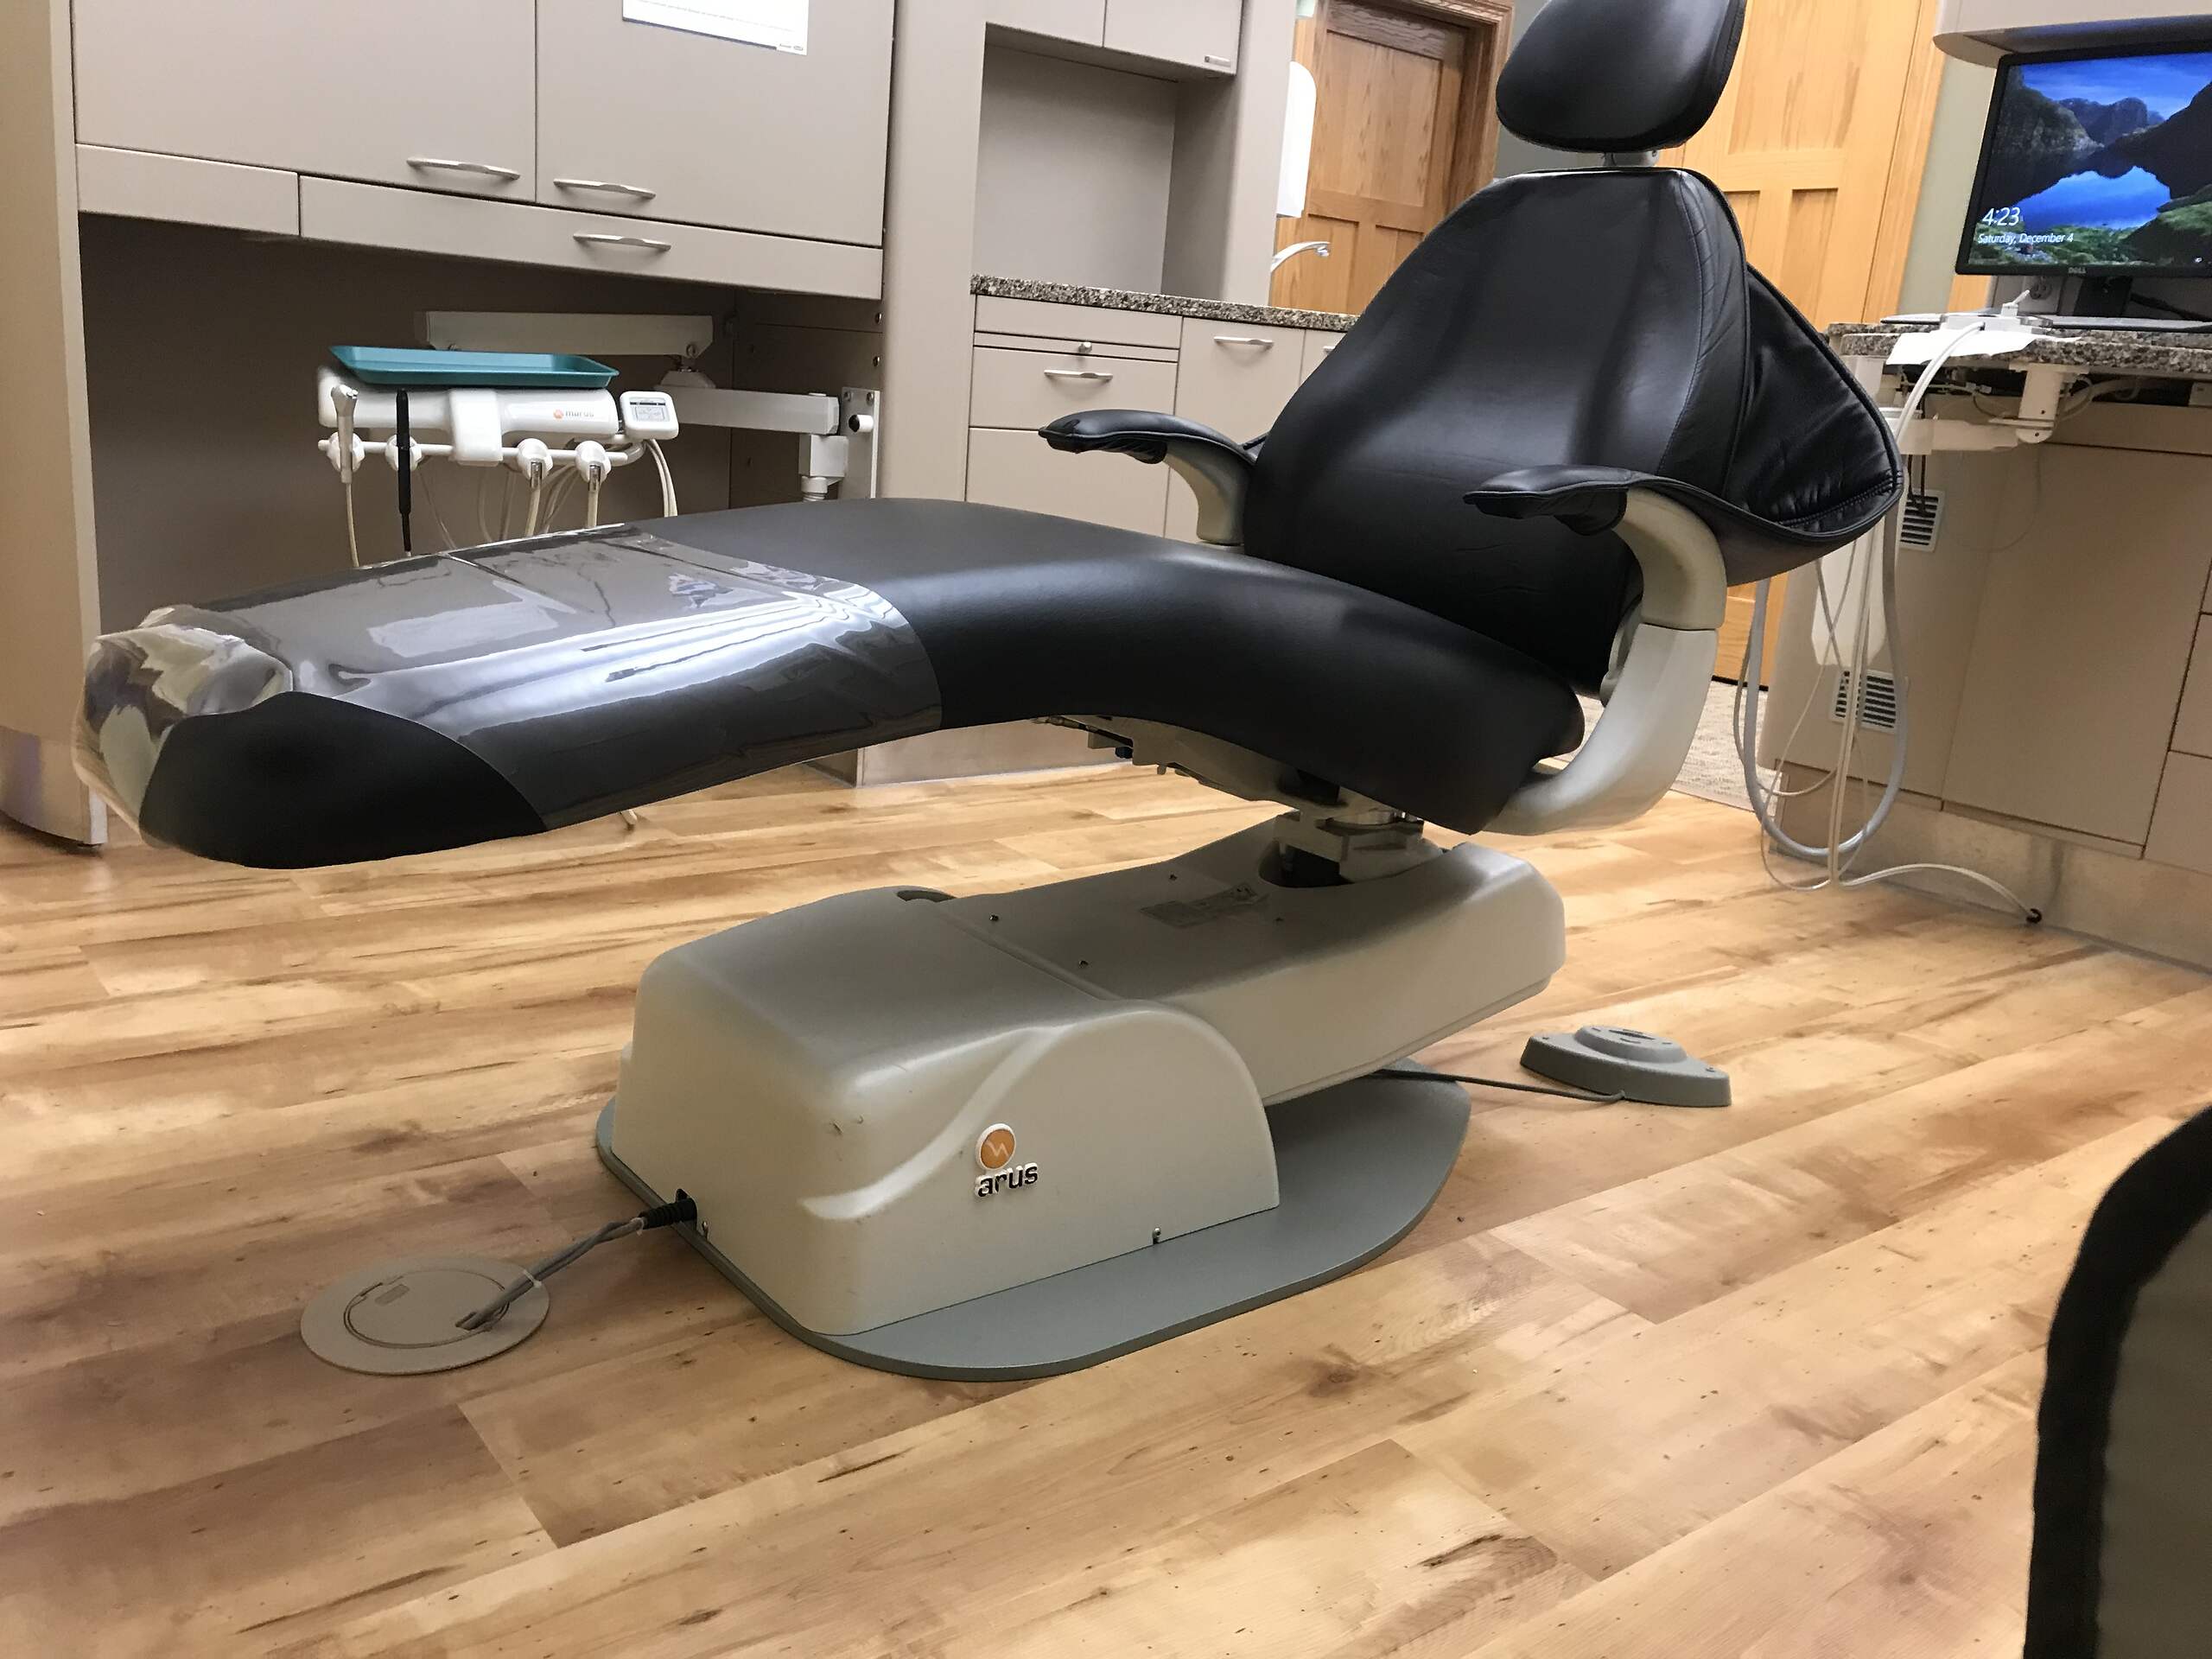 A modern dental chair with dentistry equipment in an examination room, ready for the next patient.